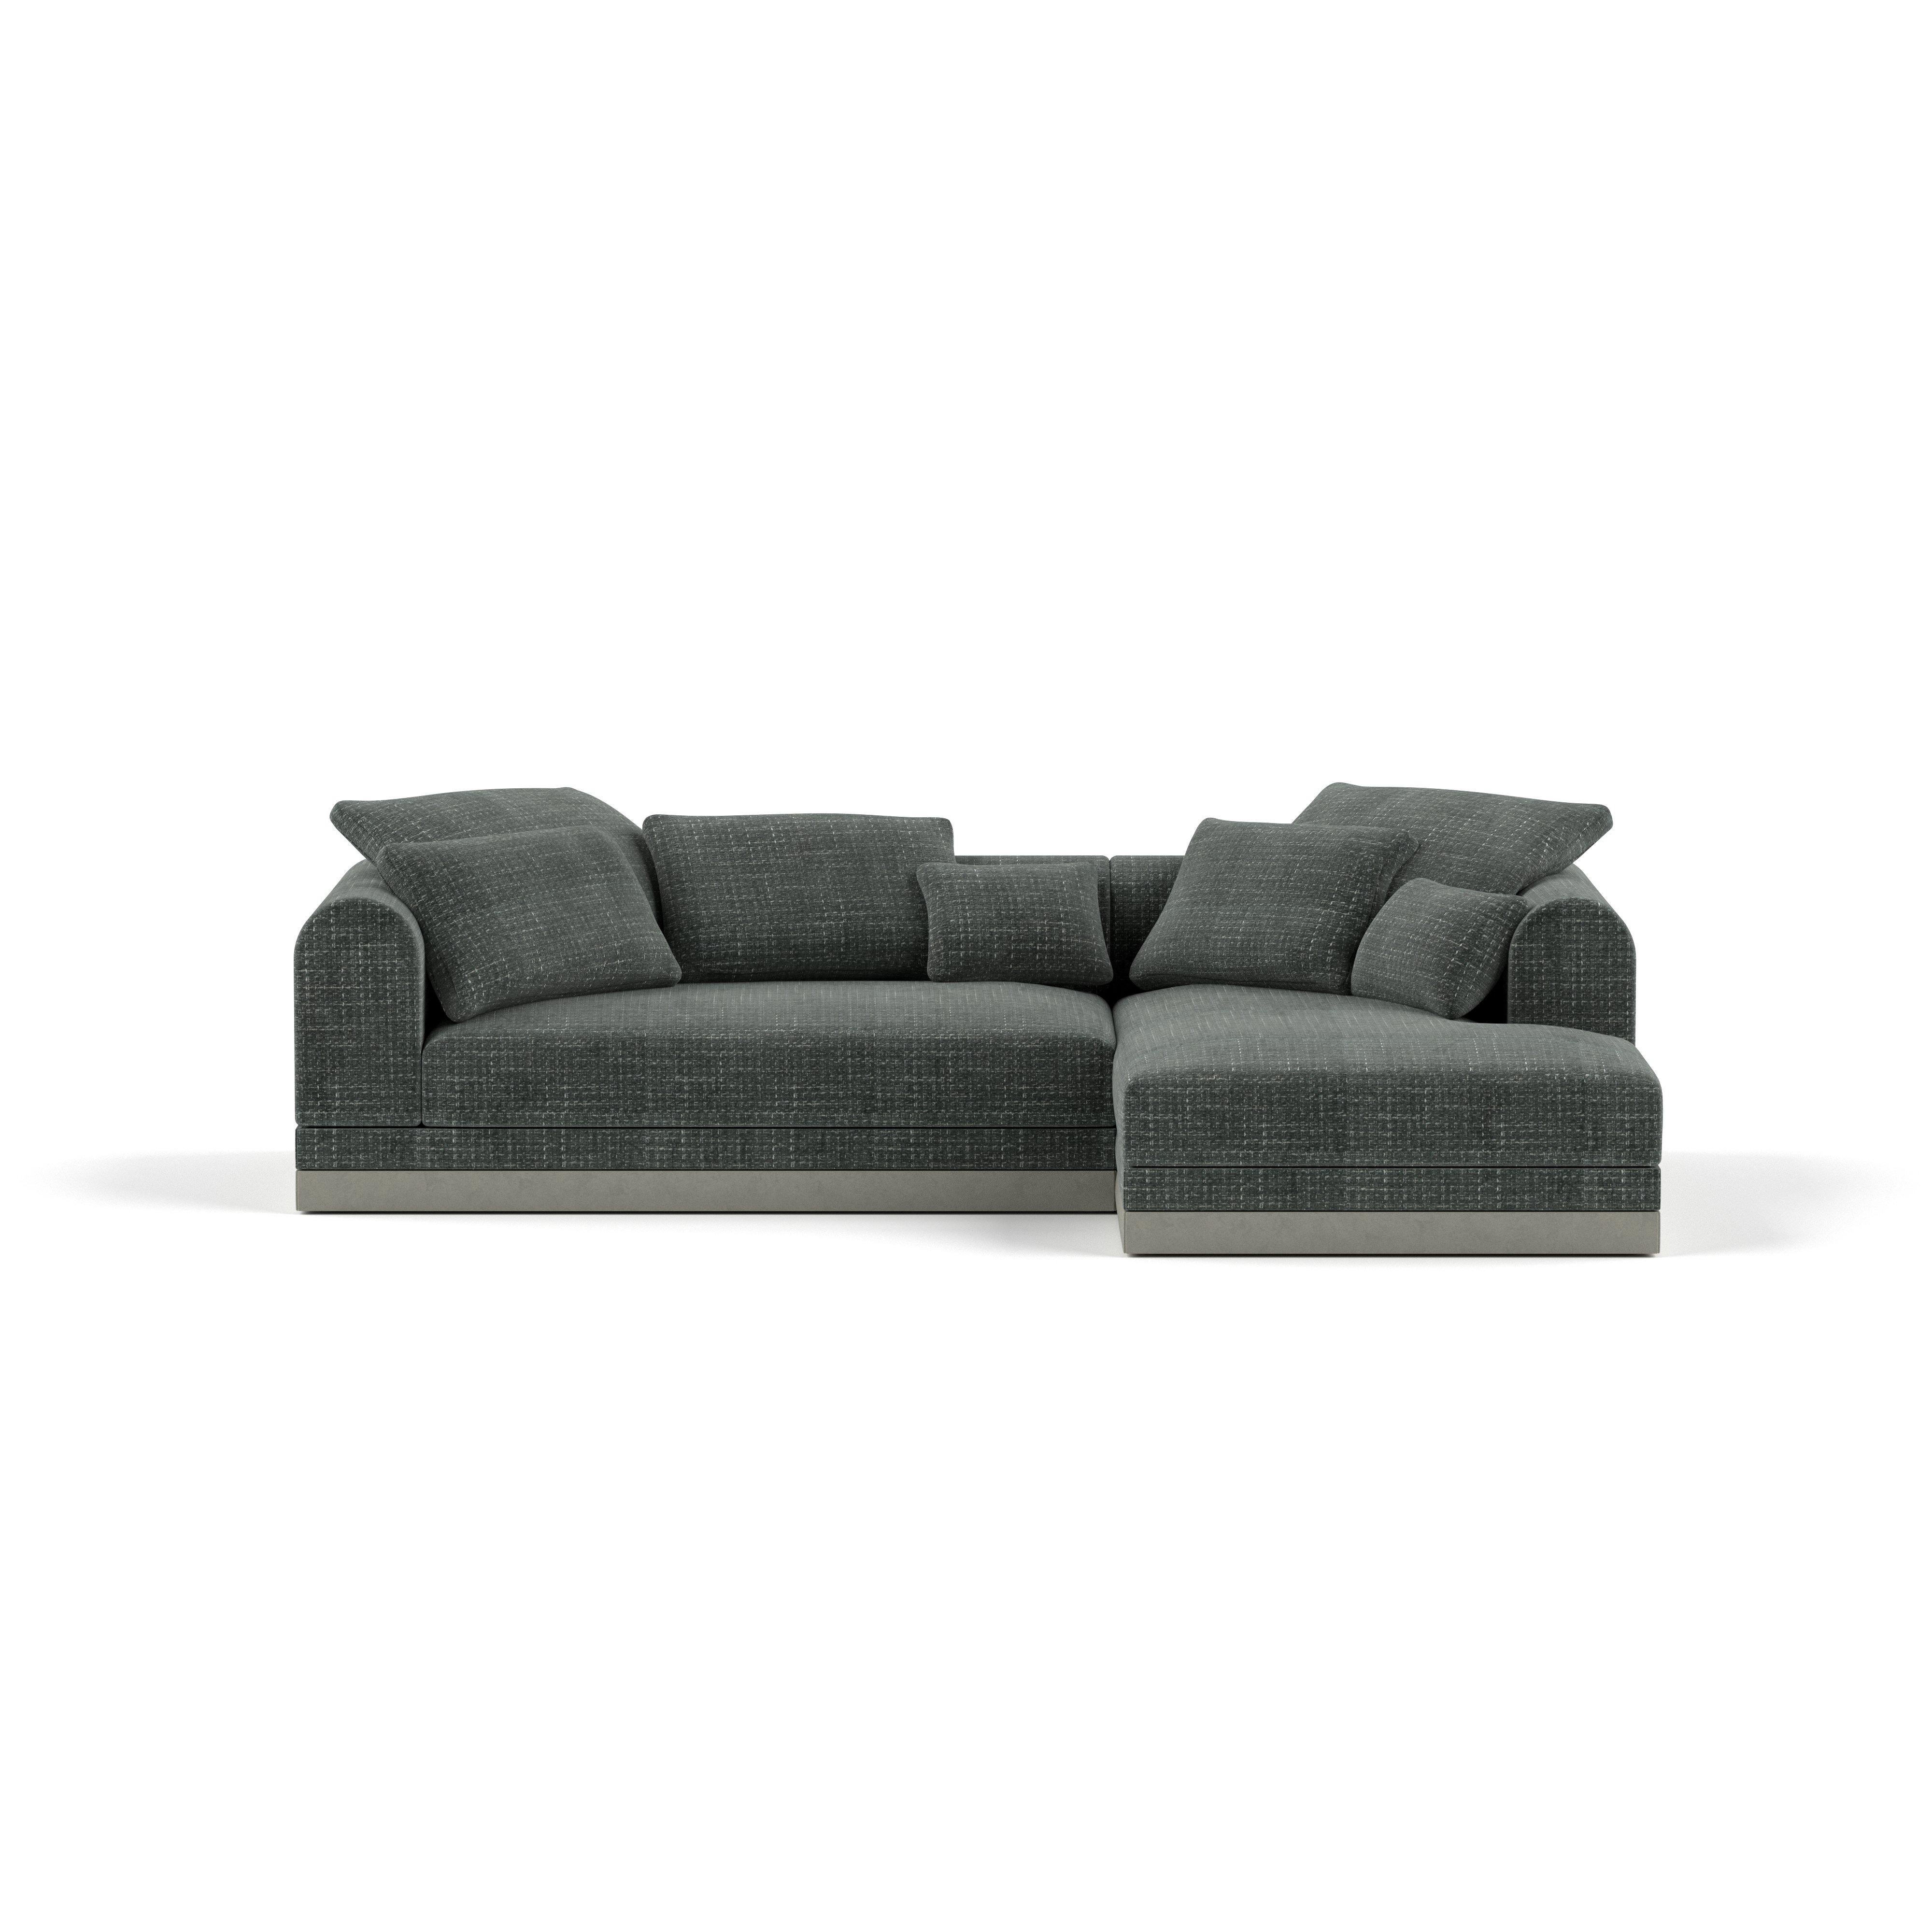 'Aqueduct' sofa by Poiat.
Setup 1.
Dimensions : H. 77 cm x W. 264 cm x D. 162 cm (SH 40 cm).

Aqueduct collection 2022 by Timo Mikkonen & Antti Rouhunkoski.

upholstery: Chivasso - Yang 95.
Plinth: High Plinth.

The Aqueduct is a softly